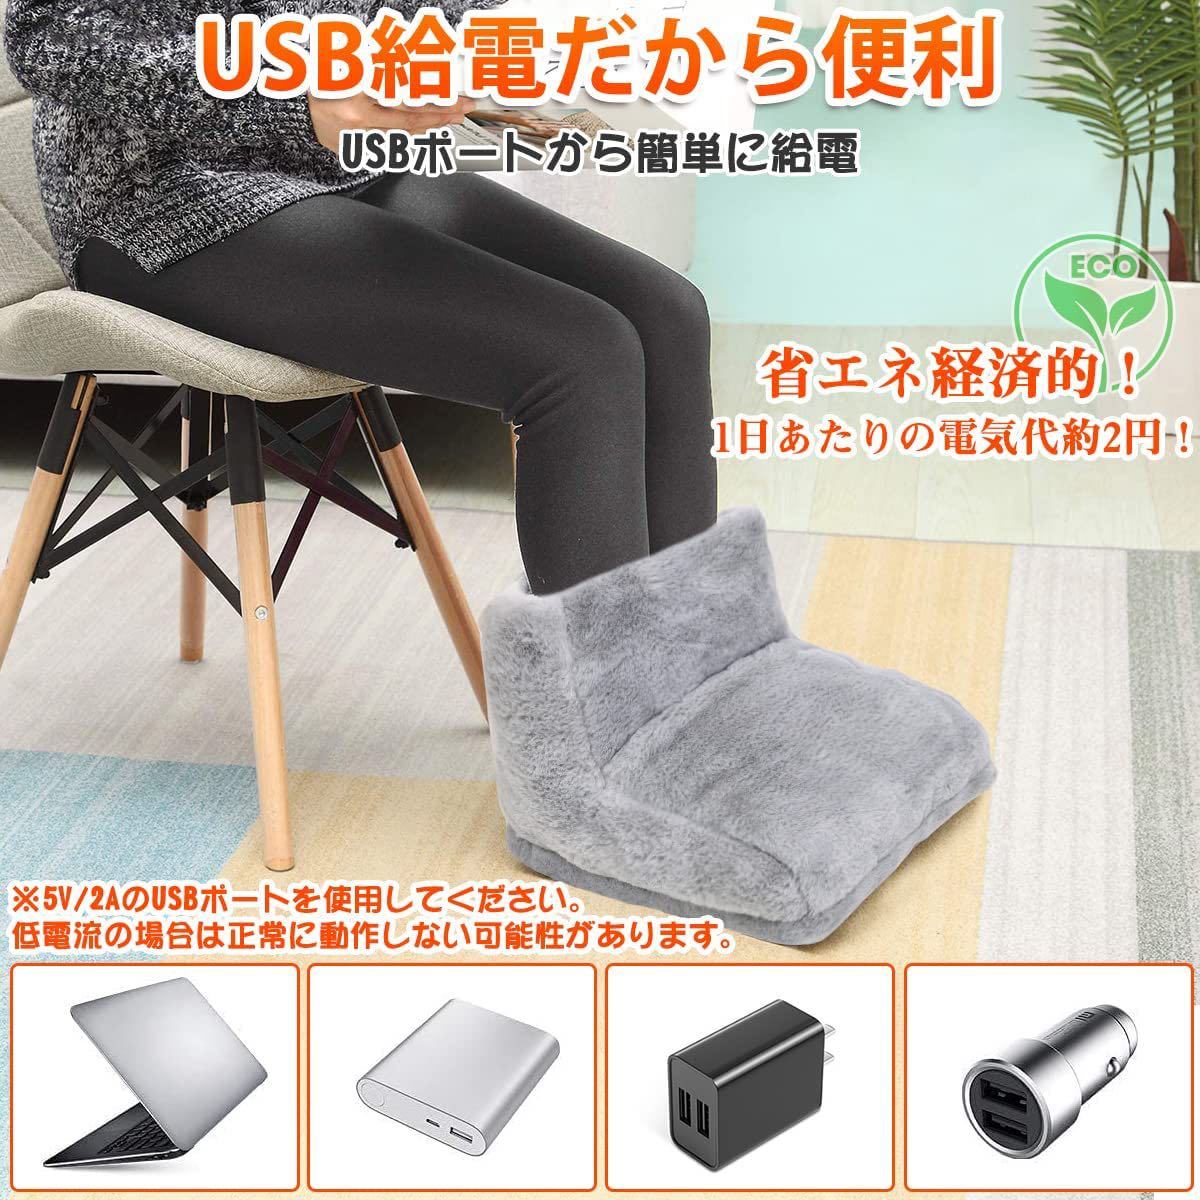  foot warmer usb pair temperature vessel underfoot heater electric pair temperature vessel temperature 3 -step adjustment timer function ...tere Work staying home .. underfoot heating 